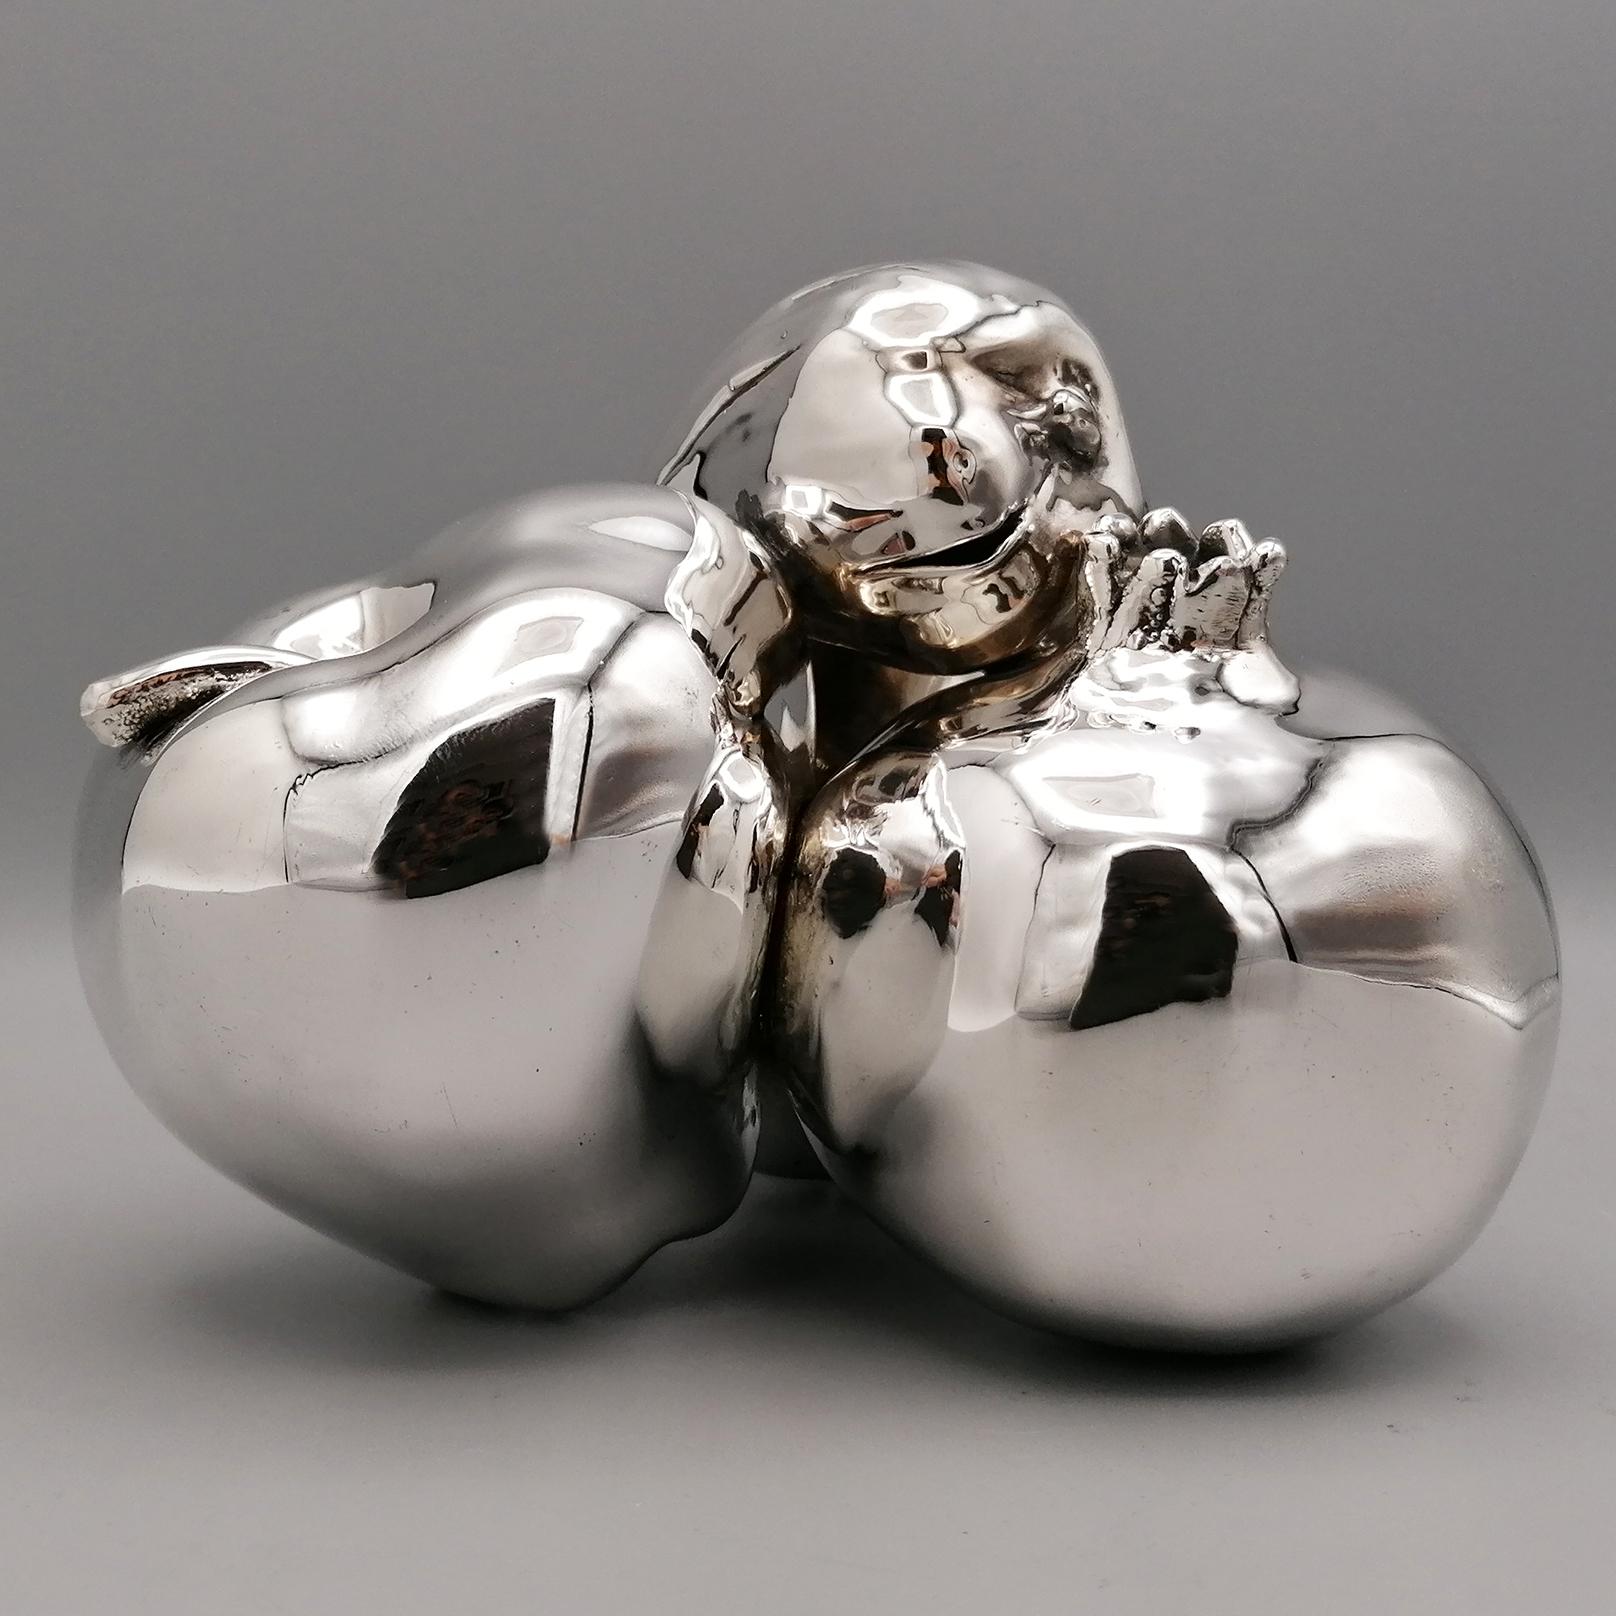 Hand-Crafted Fruit set - pomegranate pear fig apple - in 999 silver